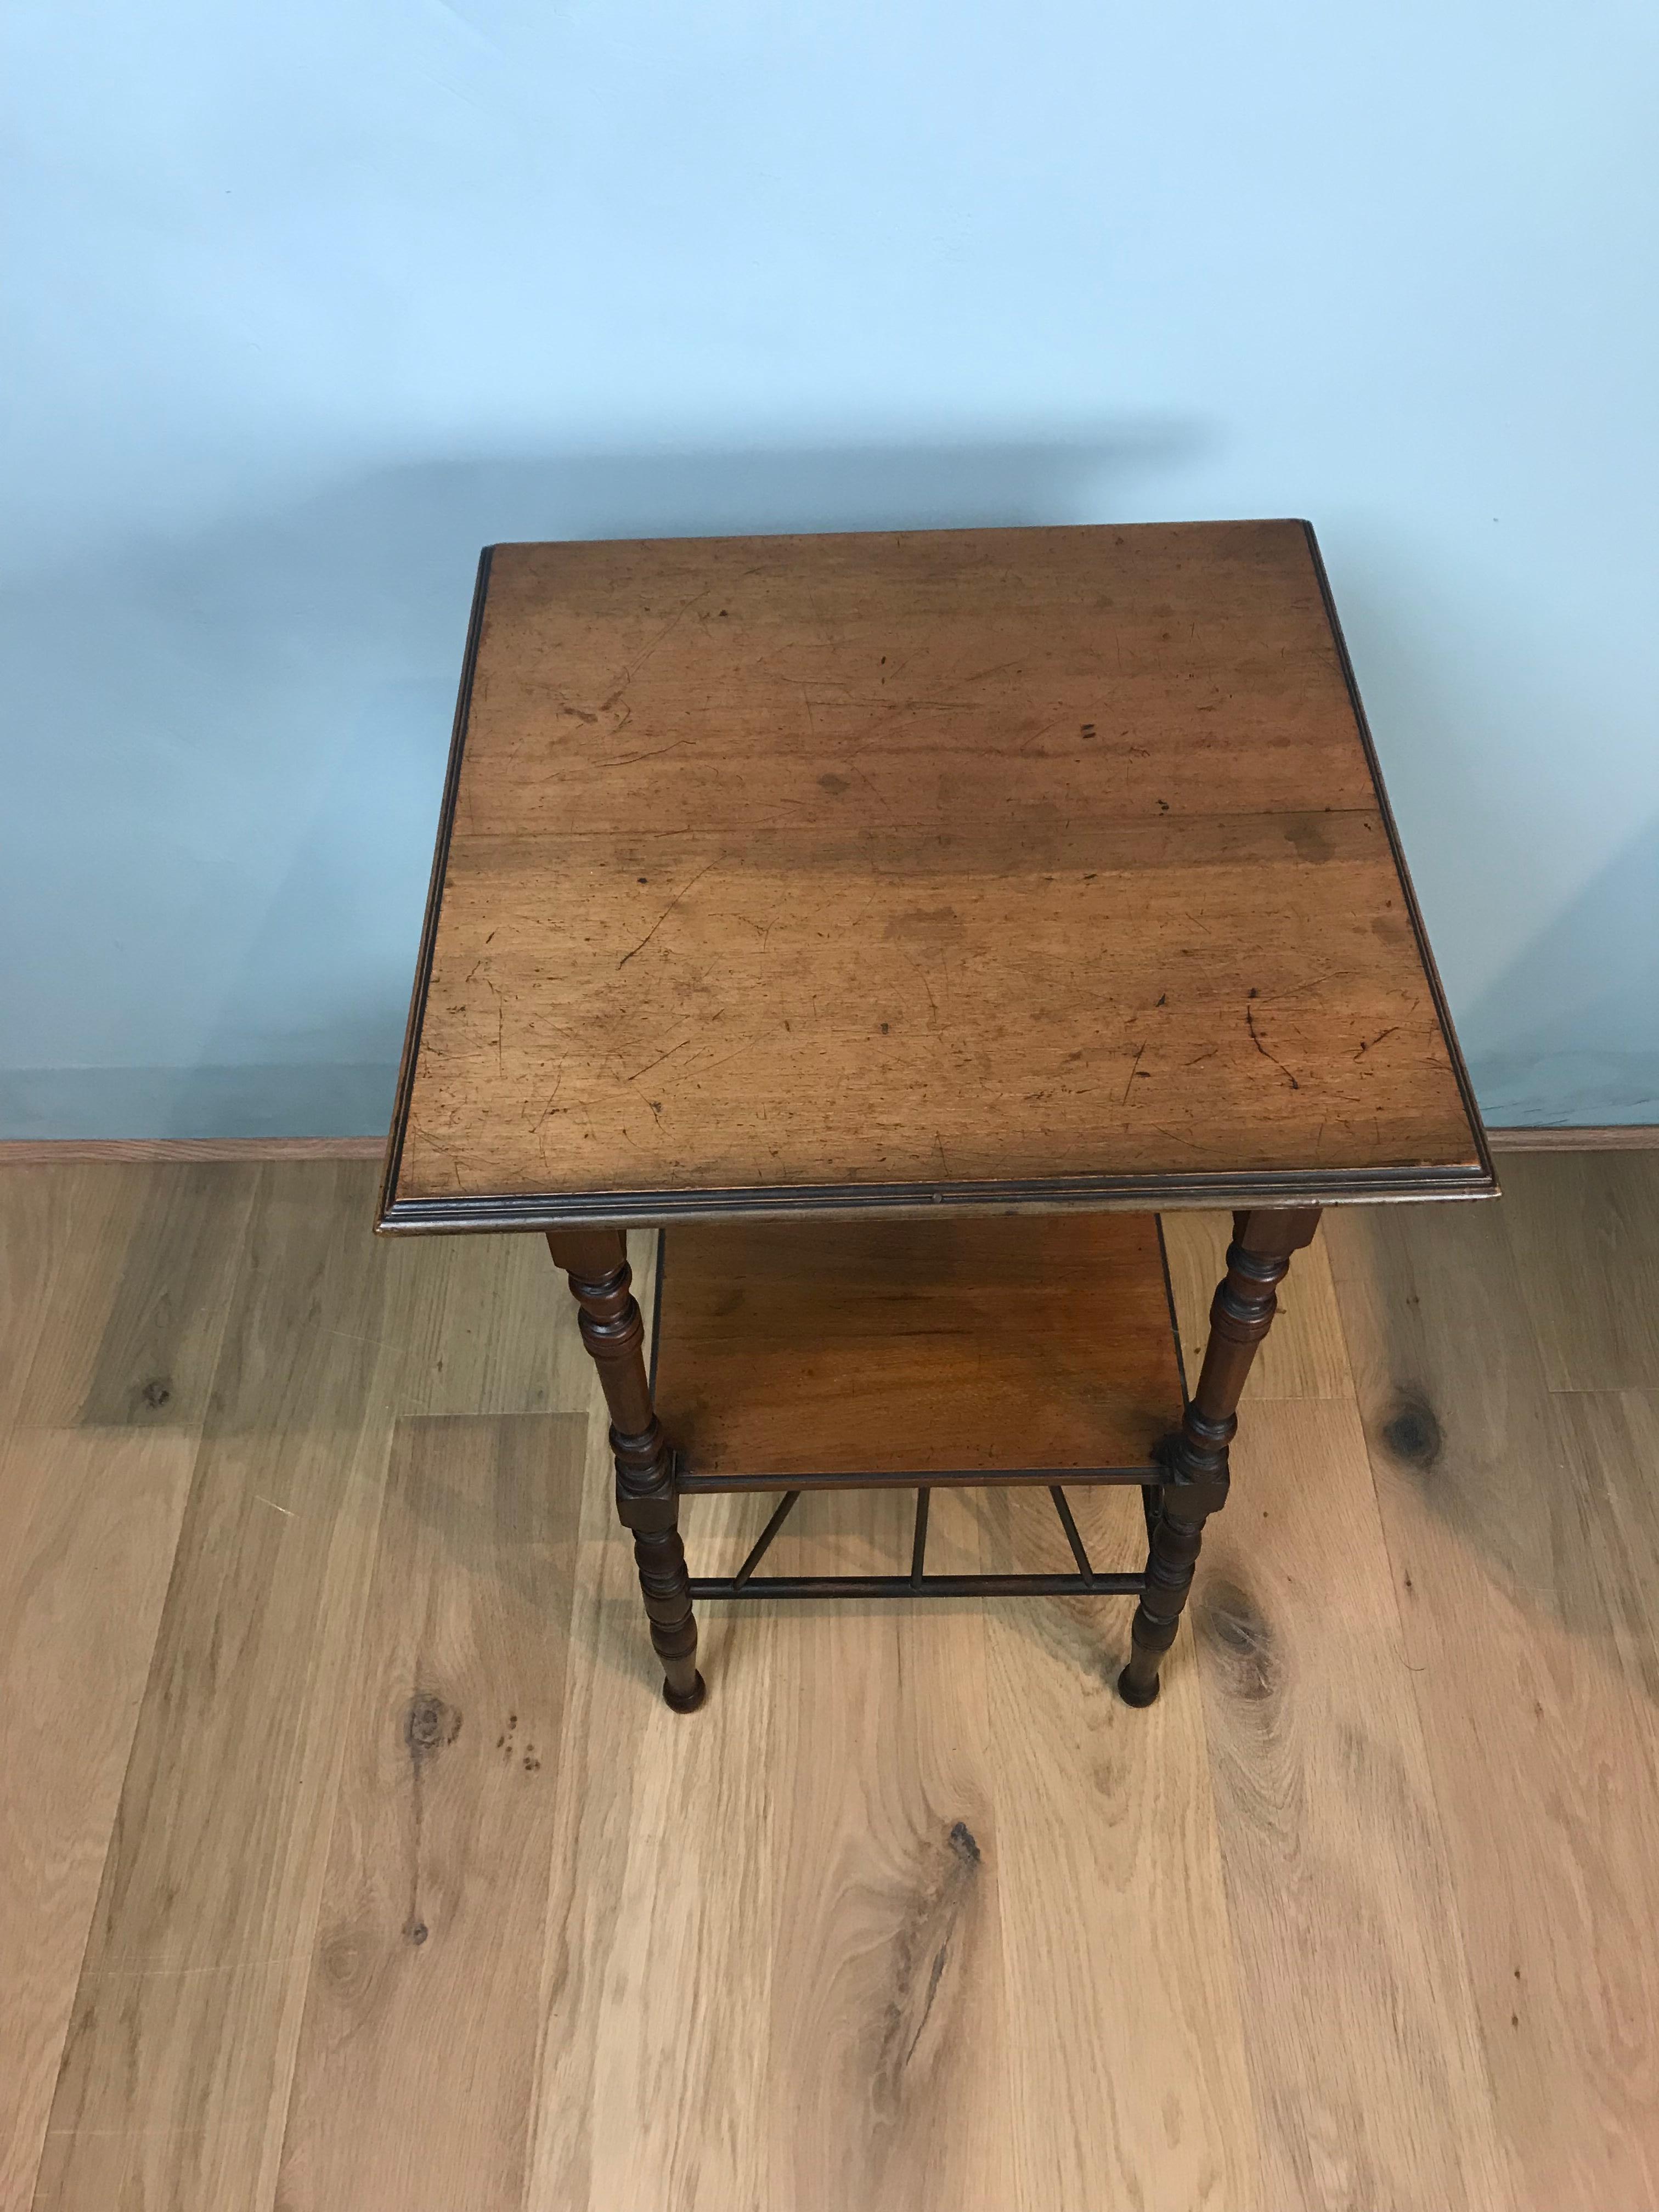 An elegant walnut side table in the manner of Edward William Godwin. Made from walnut, this 19th century occasional or coffee table has a wonderful light honey colour. It features fine turned legs, and lattice bracing beneath the lower tier, which